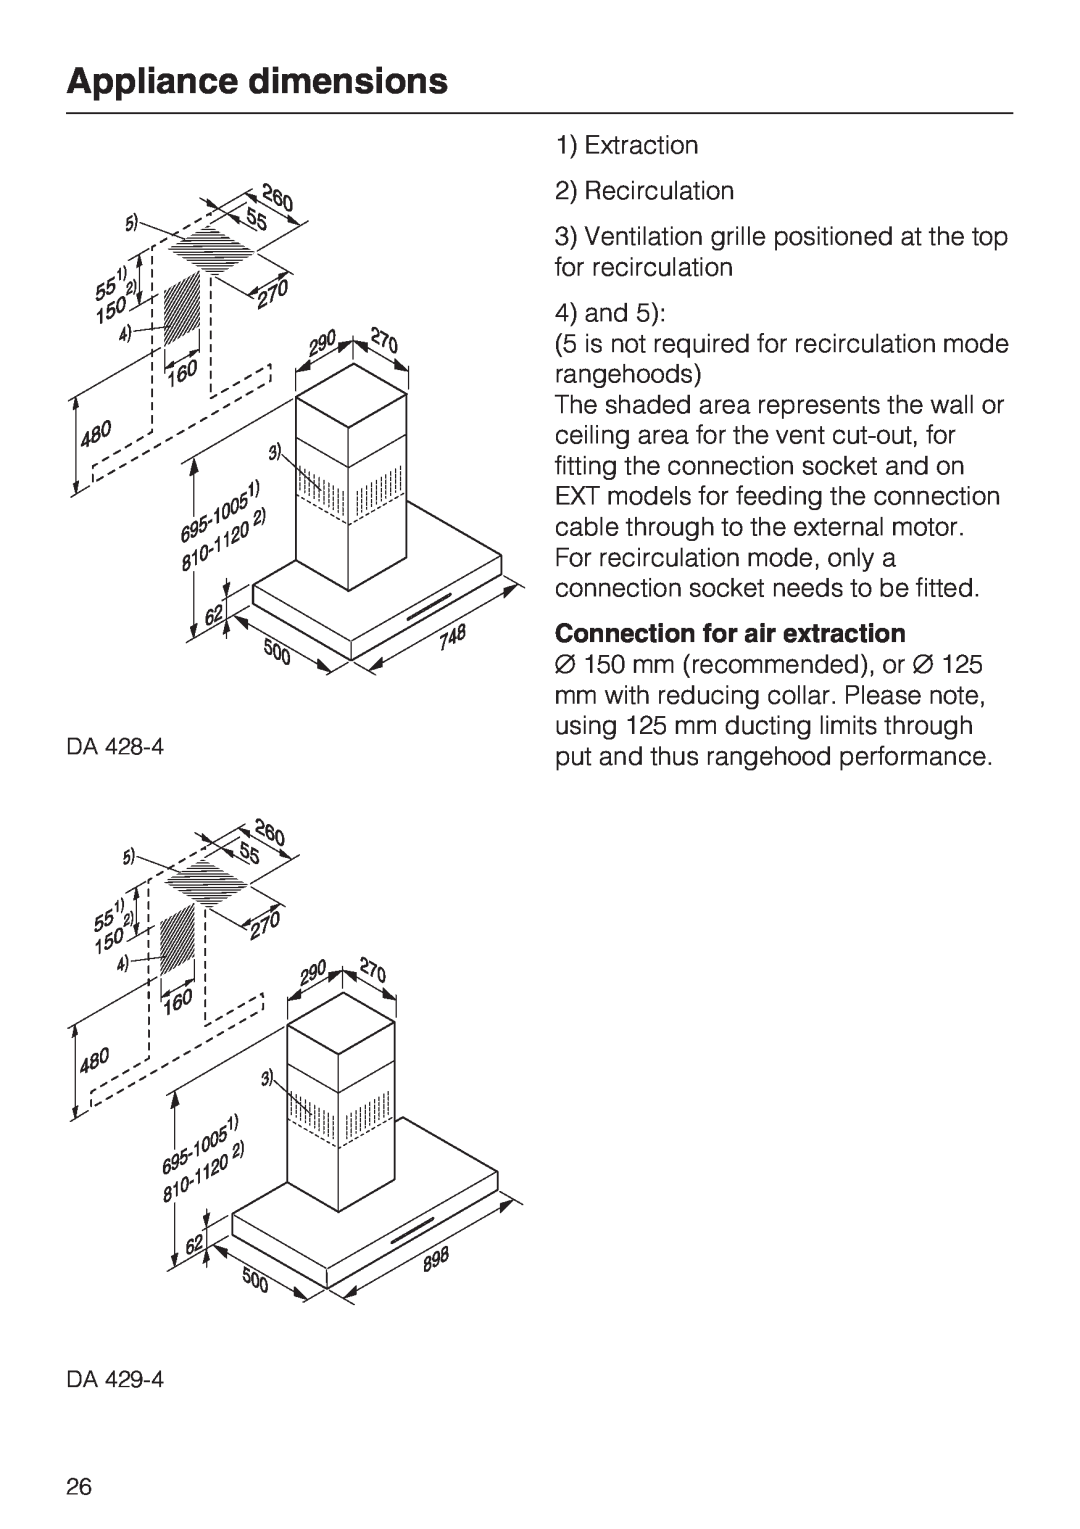 Miele DA 429-4 EXT, DA 428-4 EXT installation instructions Appliance dimensions, Connection for air extraction 